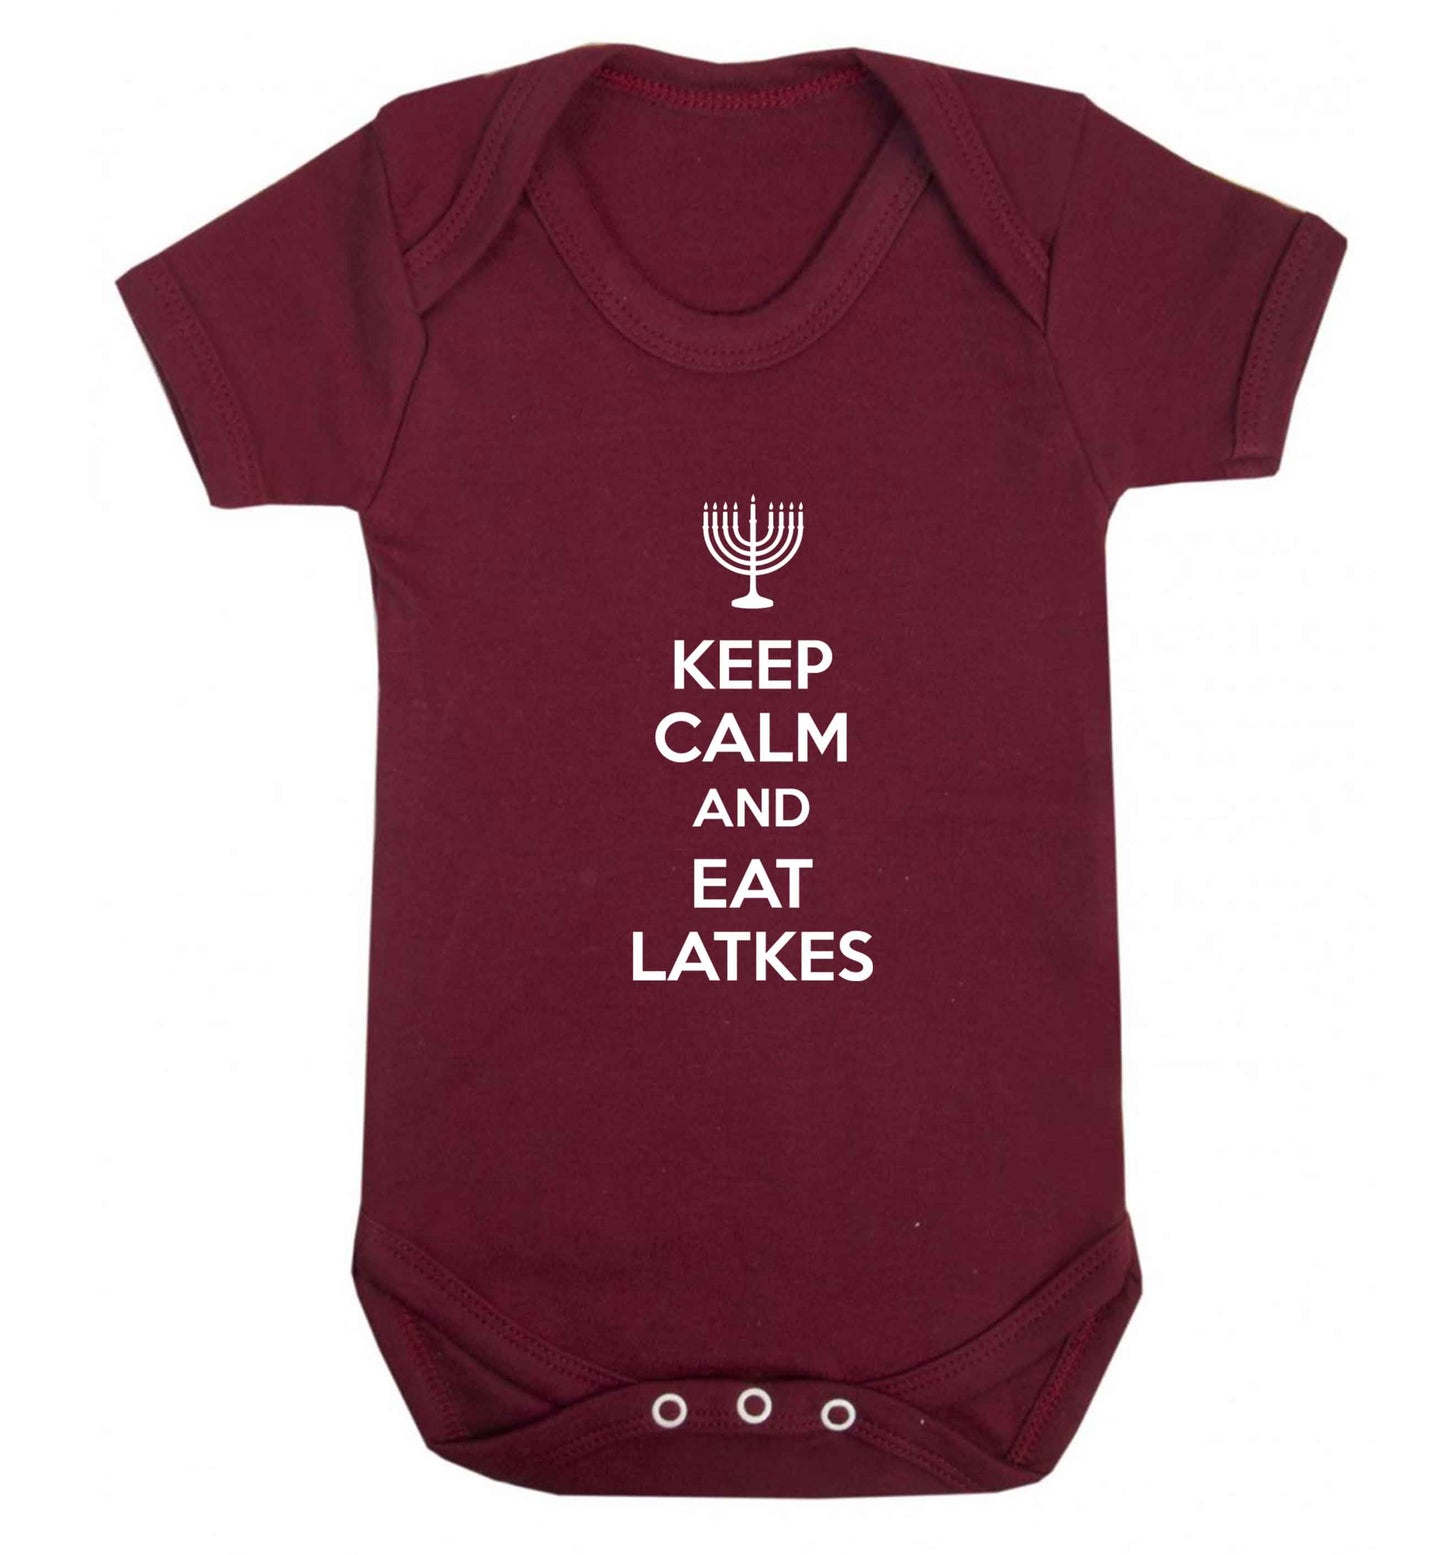 Keep calm and eat latkes baby vest maroon 18-24 months